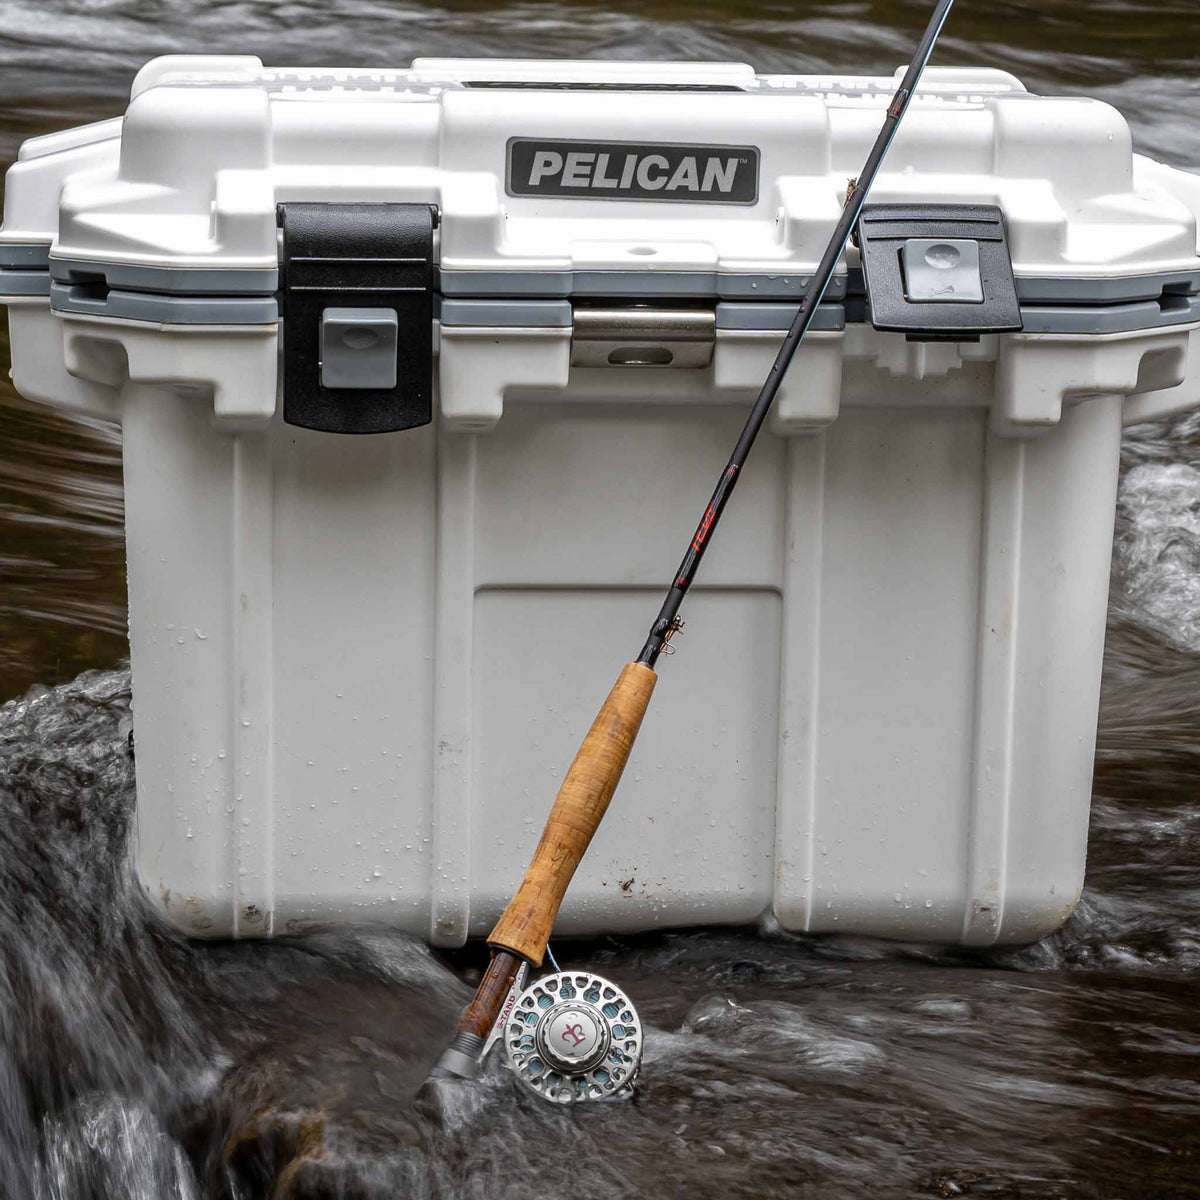 White / Grey Pelican Elite Cooler in stream with fishing rod